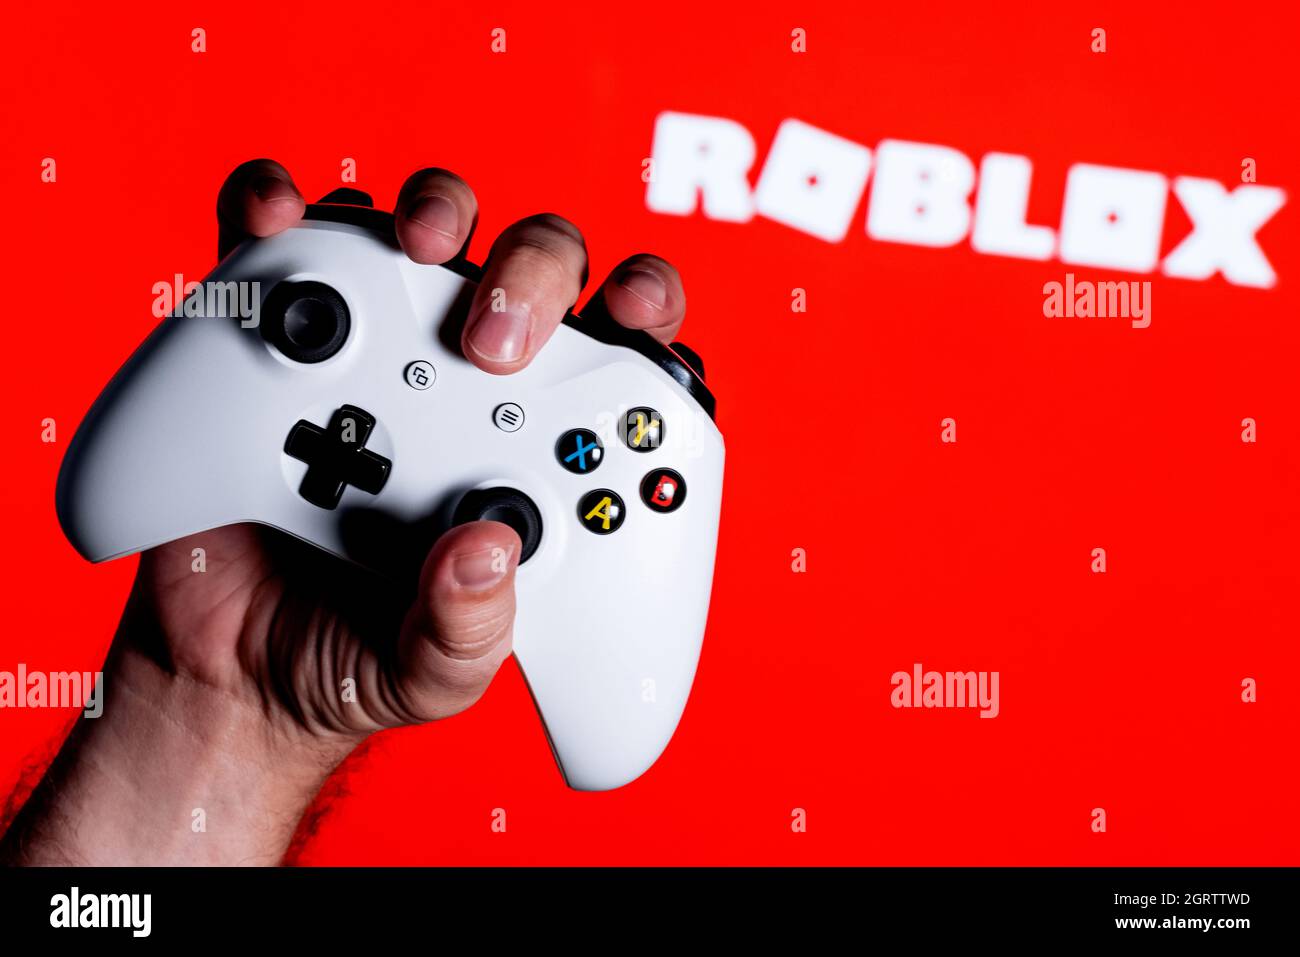 Roblox is an online game platform and game creation system. A white gamepad  clutched in the hand on the red background with the logo of Roblox Stock  Photo - Alamy